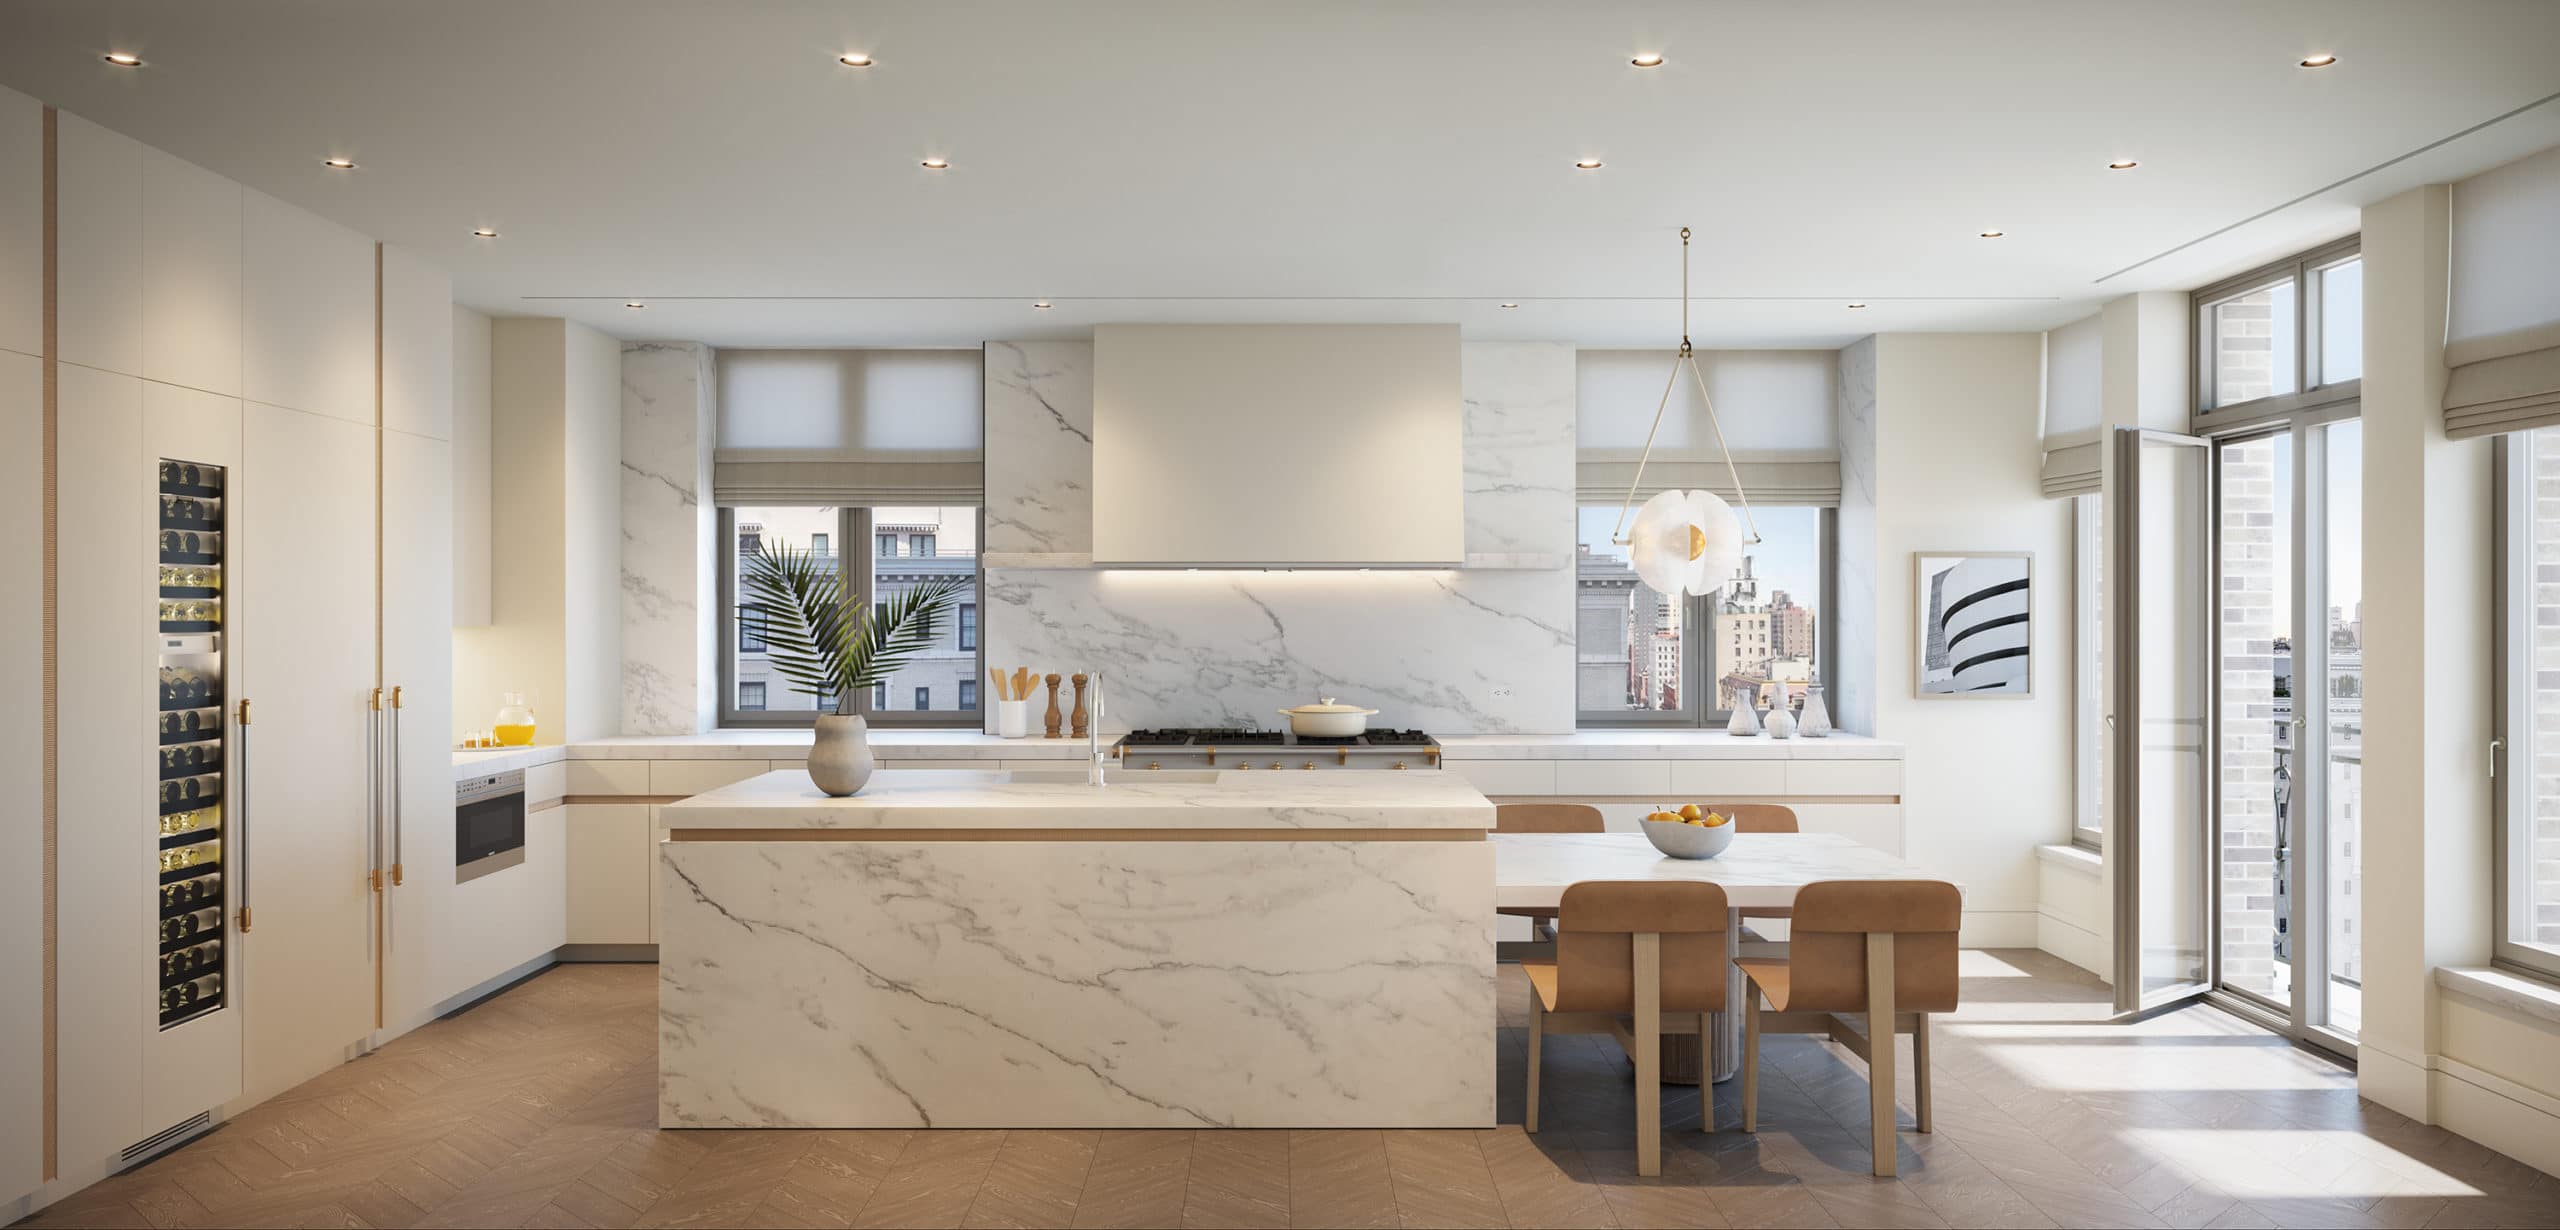 Kitchen at 1228 Madison Ave residences in NYC. White kitchen with center island with marble countertops and backsplash.